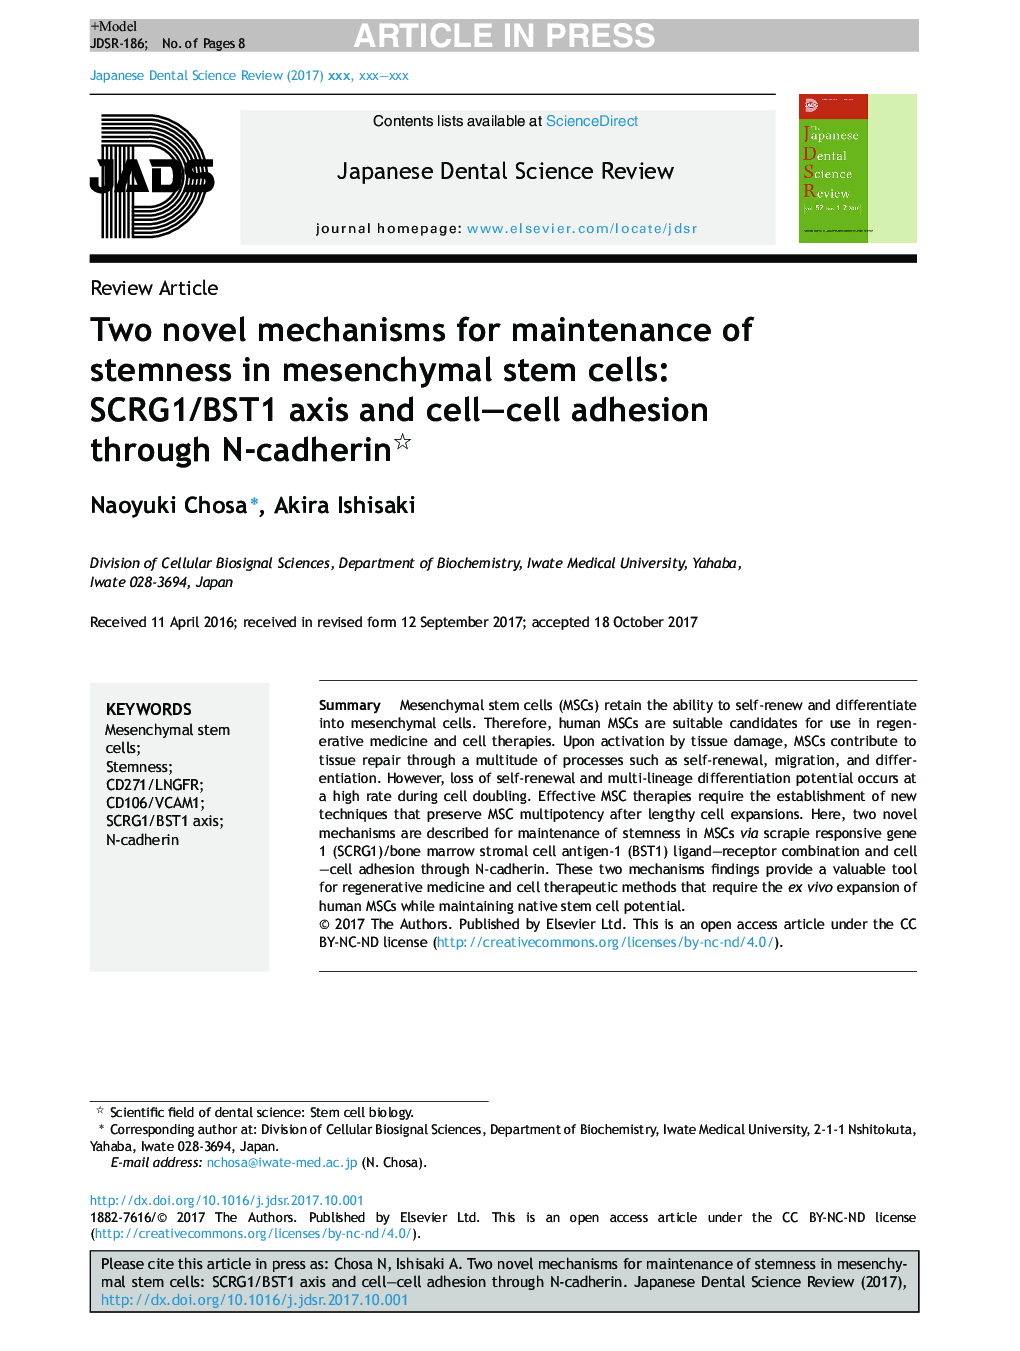 Two novel mechanisms for maintenance of stemness in mesenchymal stem cells: SCRG1/BST1 axis and cell-cell adhesion through N-cadherin